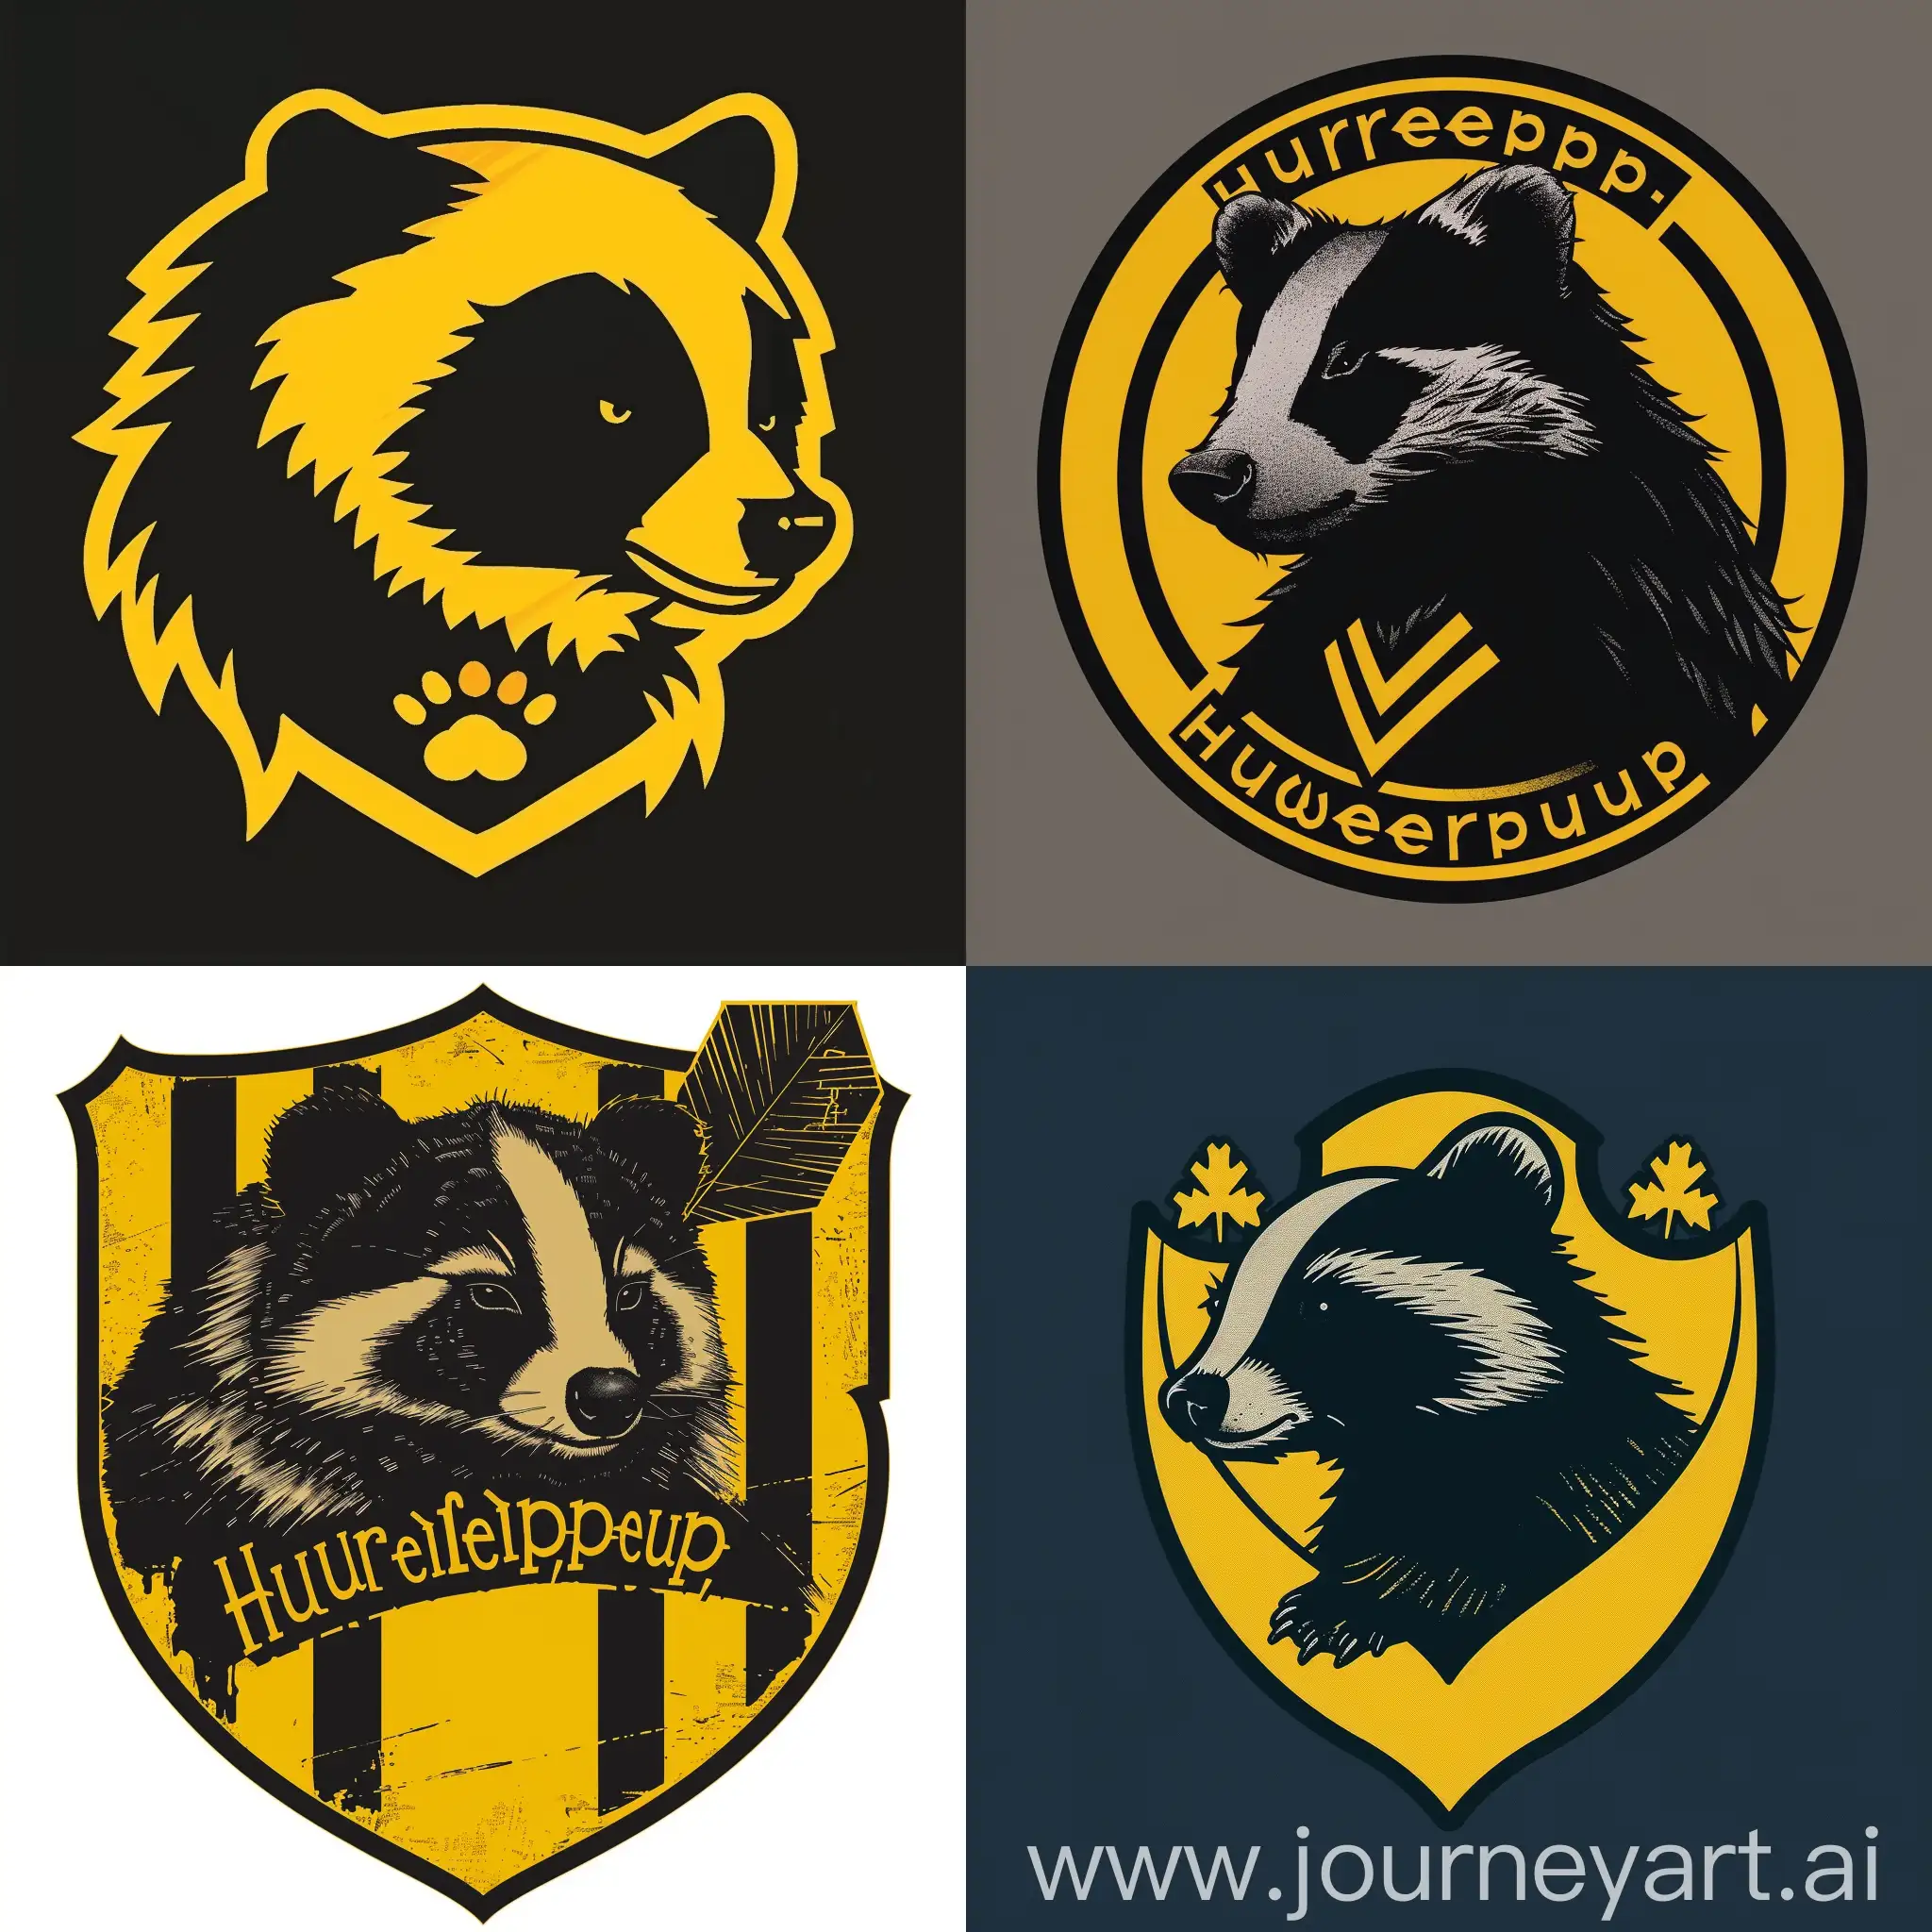 super cool logo "Hufflepuff, Hufflepuff faculty from Harry Potter, black yellow badger